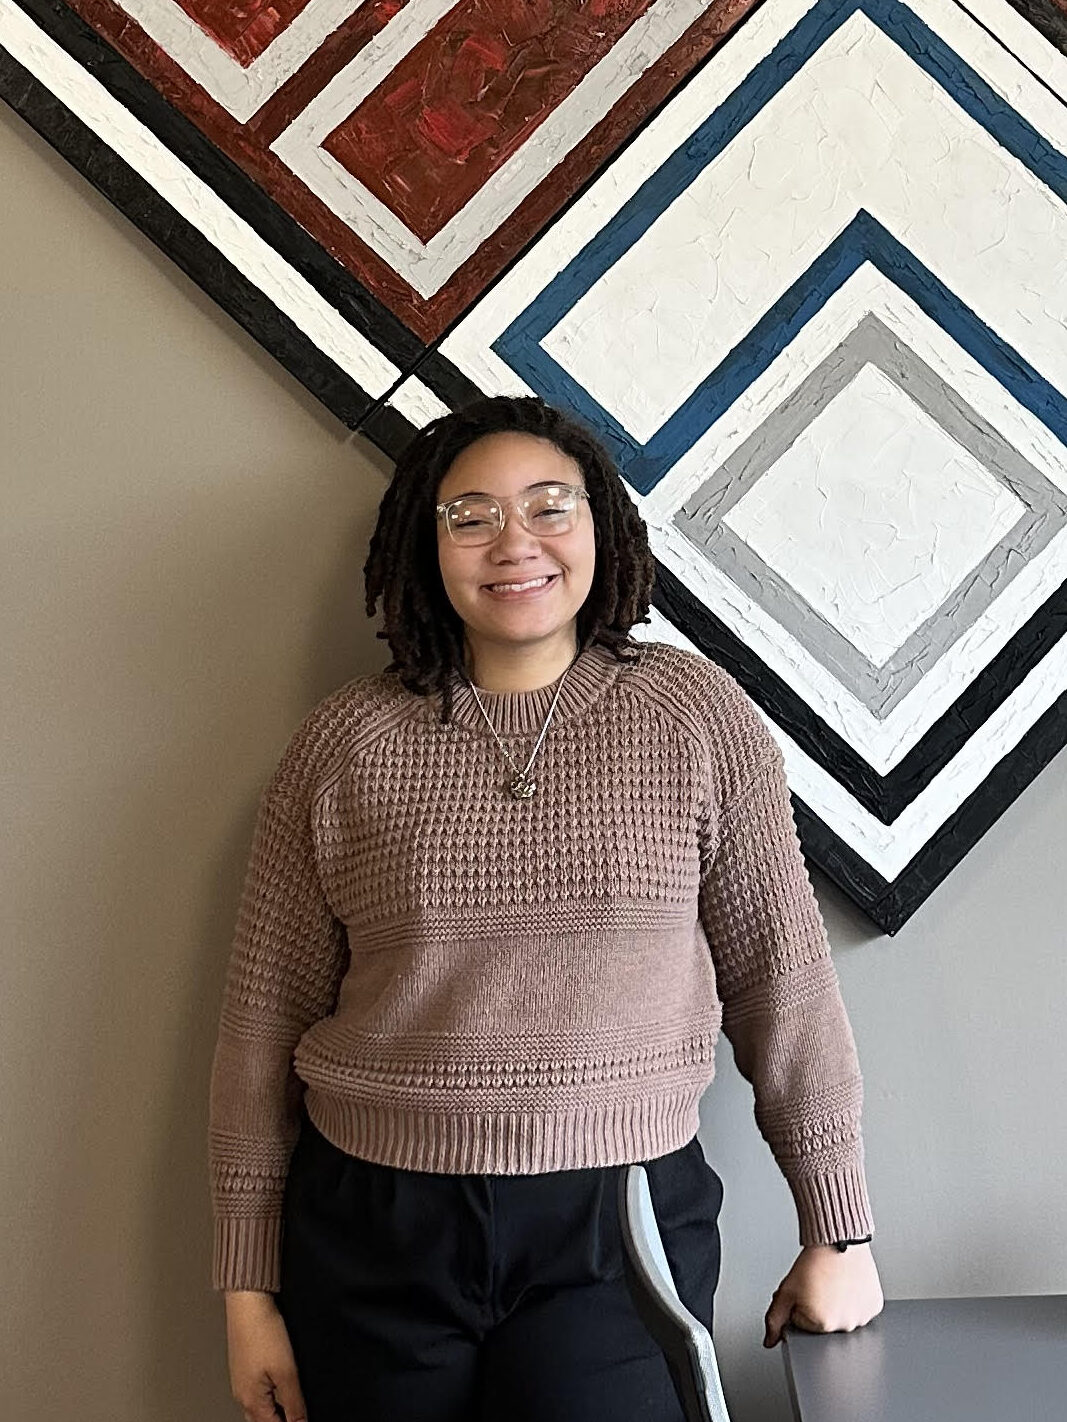 Daiah stands in front of a large painting of the Kennari logo. She is wearing a light brown sweater, black pants, and is smiling.